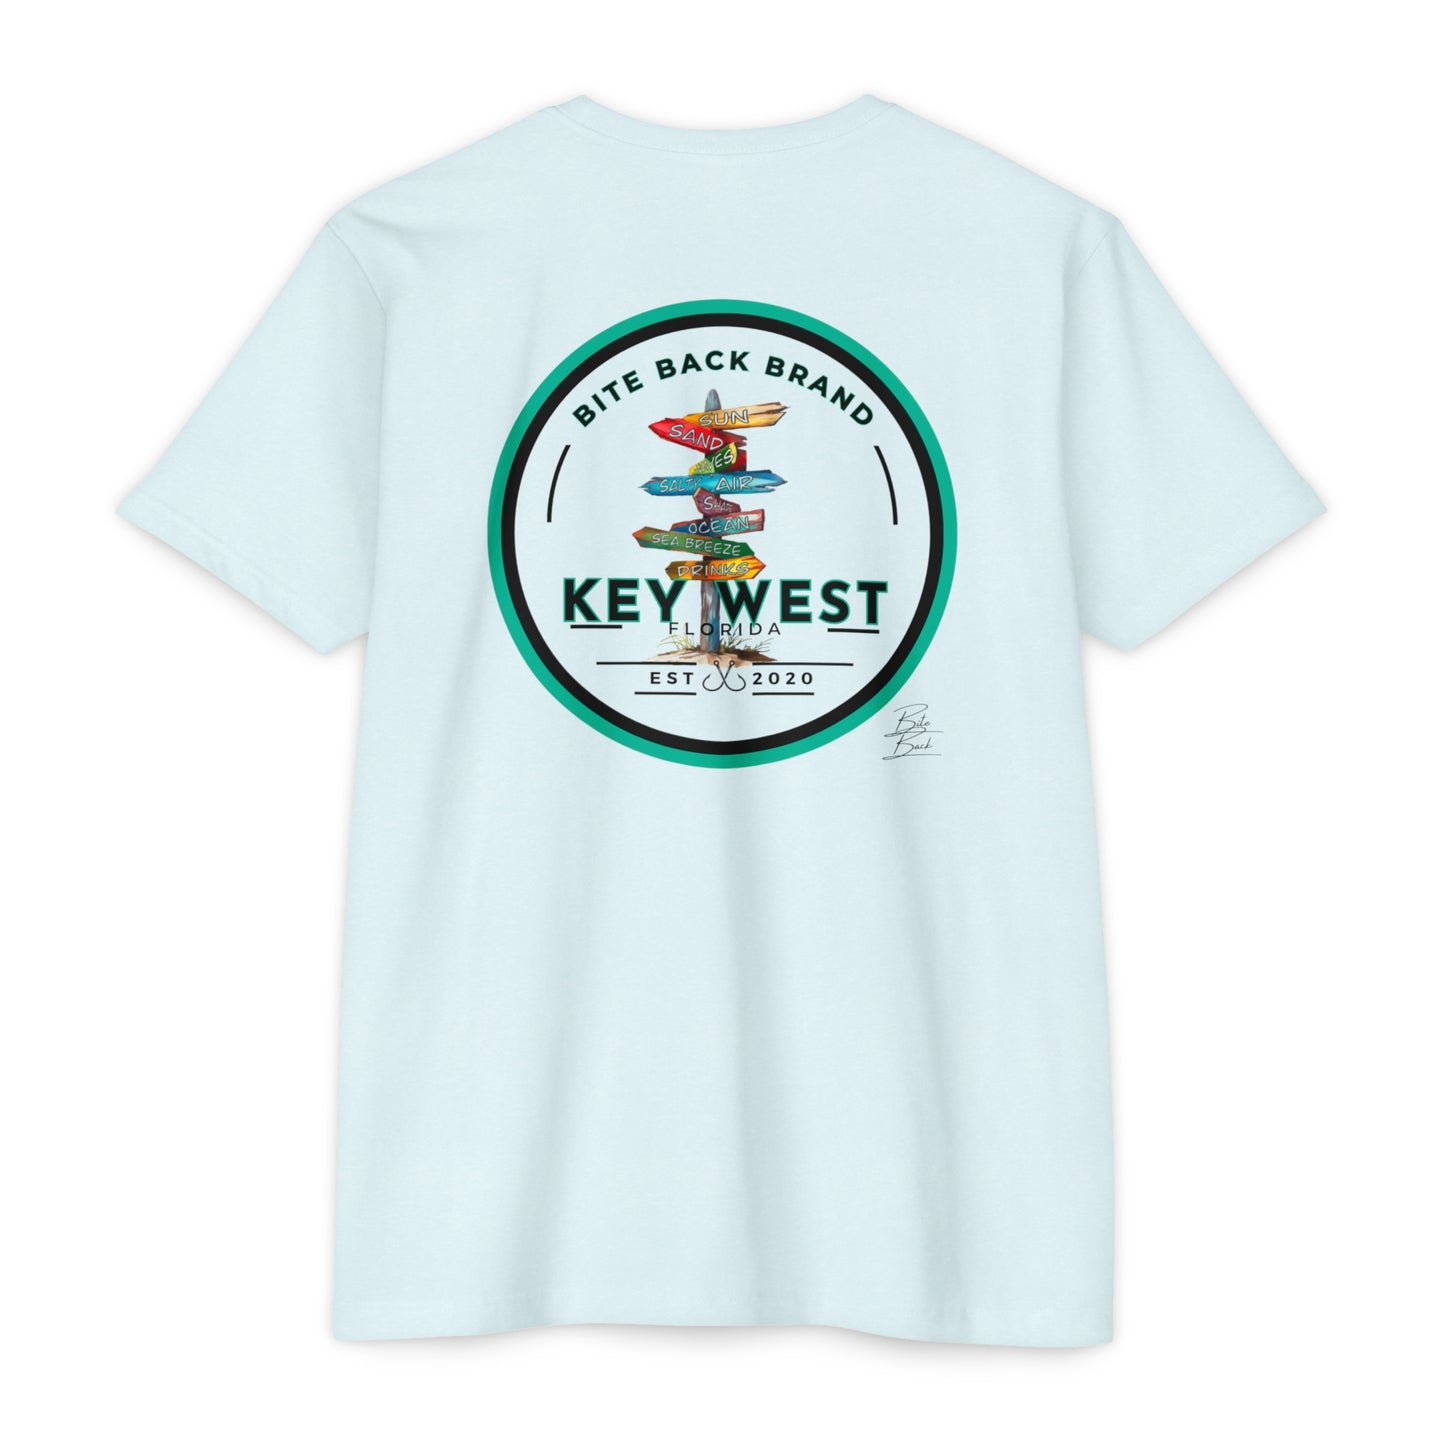 Dreaming of Key West T-shirt